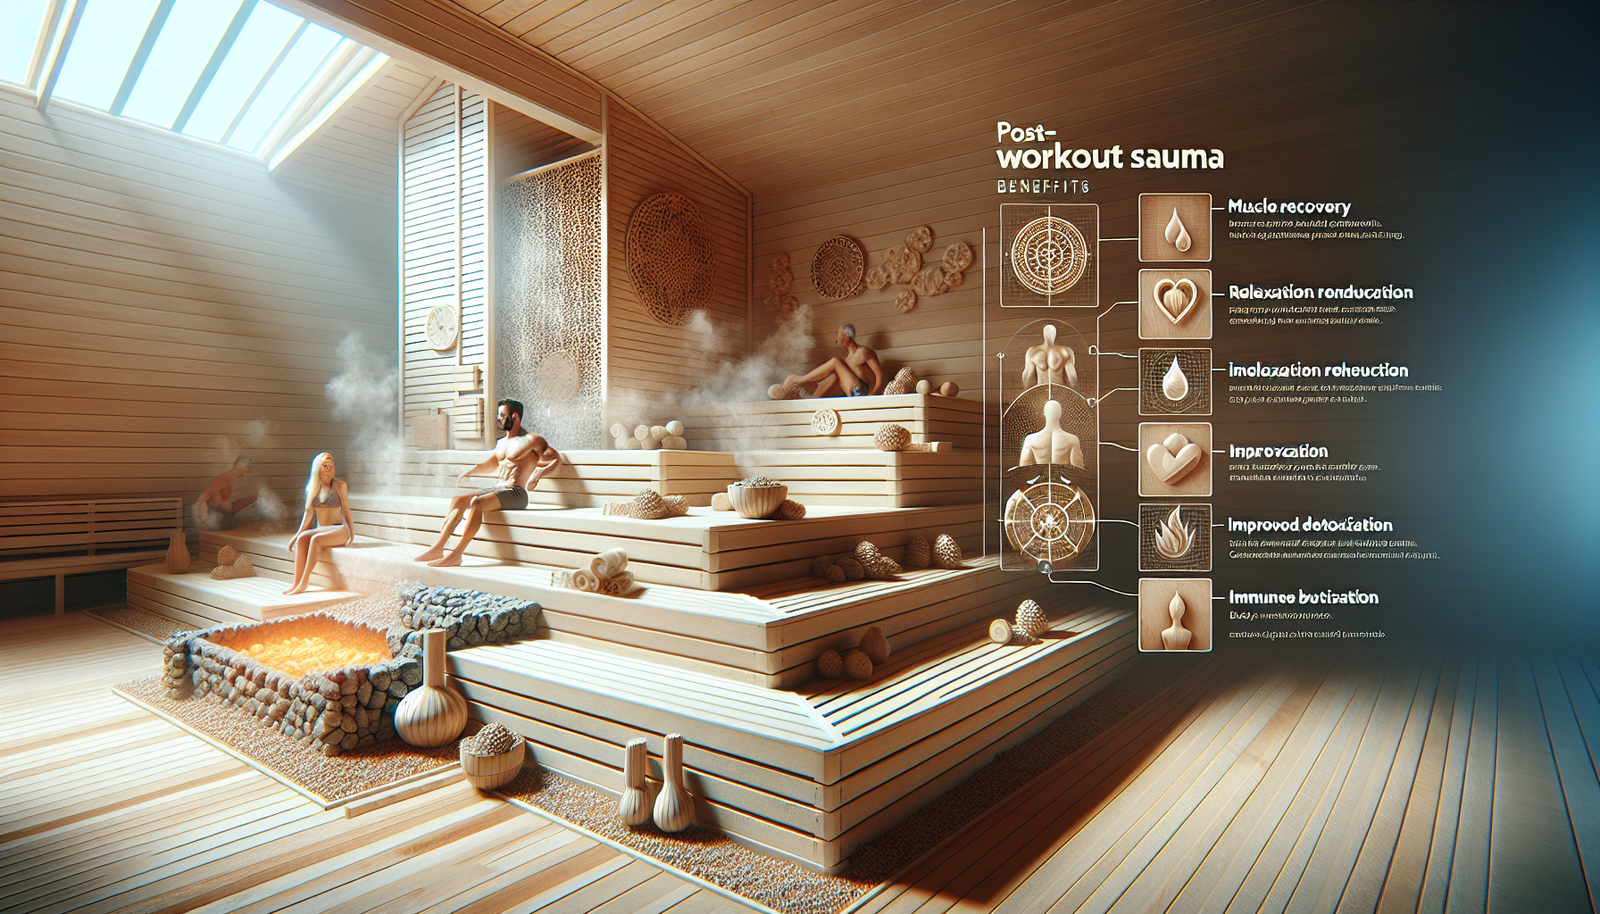 What Are The Benefits Of A Post-workout Sauna Session?